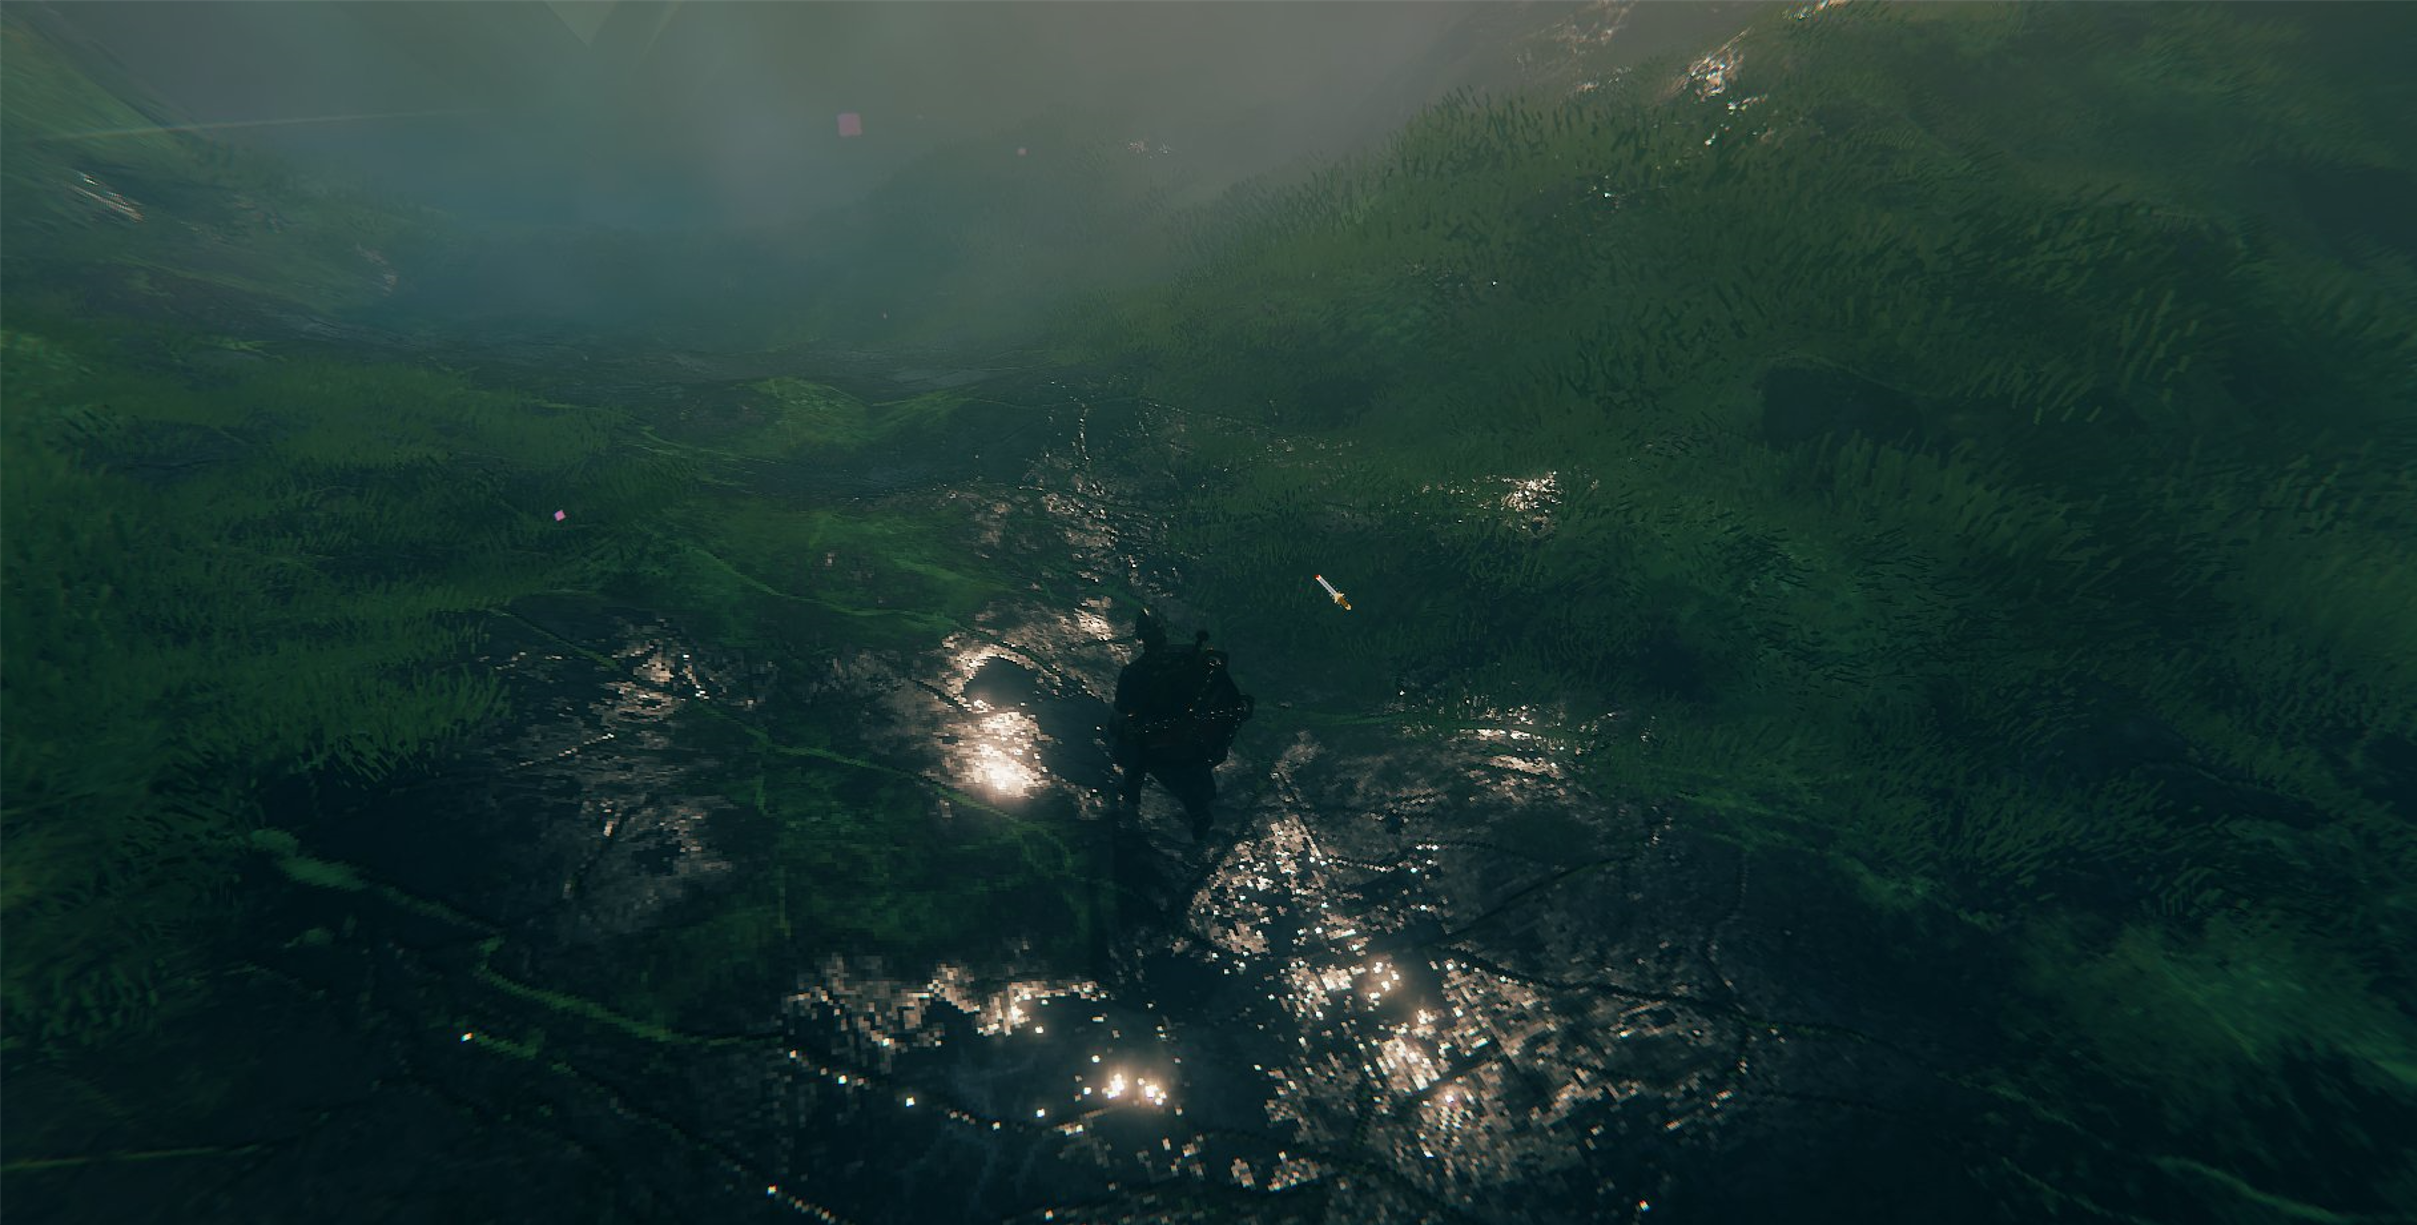 Valheim teases Mistlands biome and new caverns in the mountains